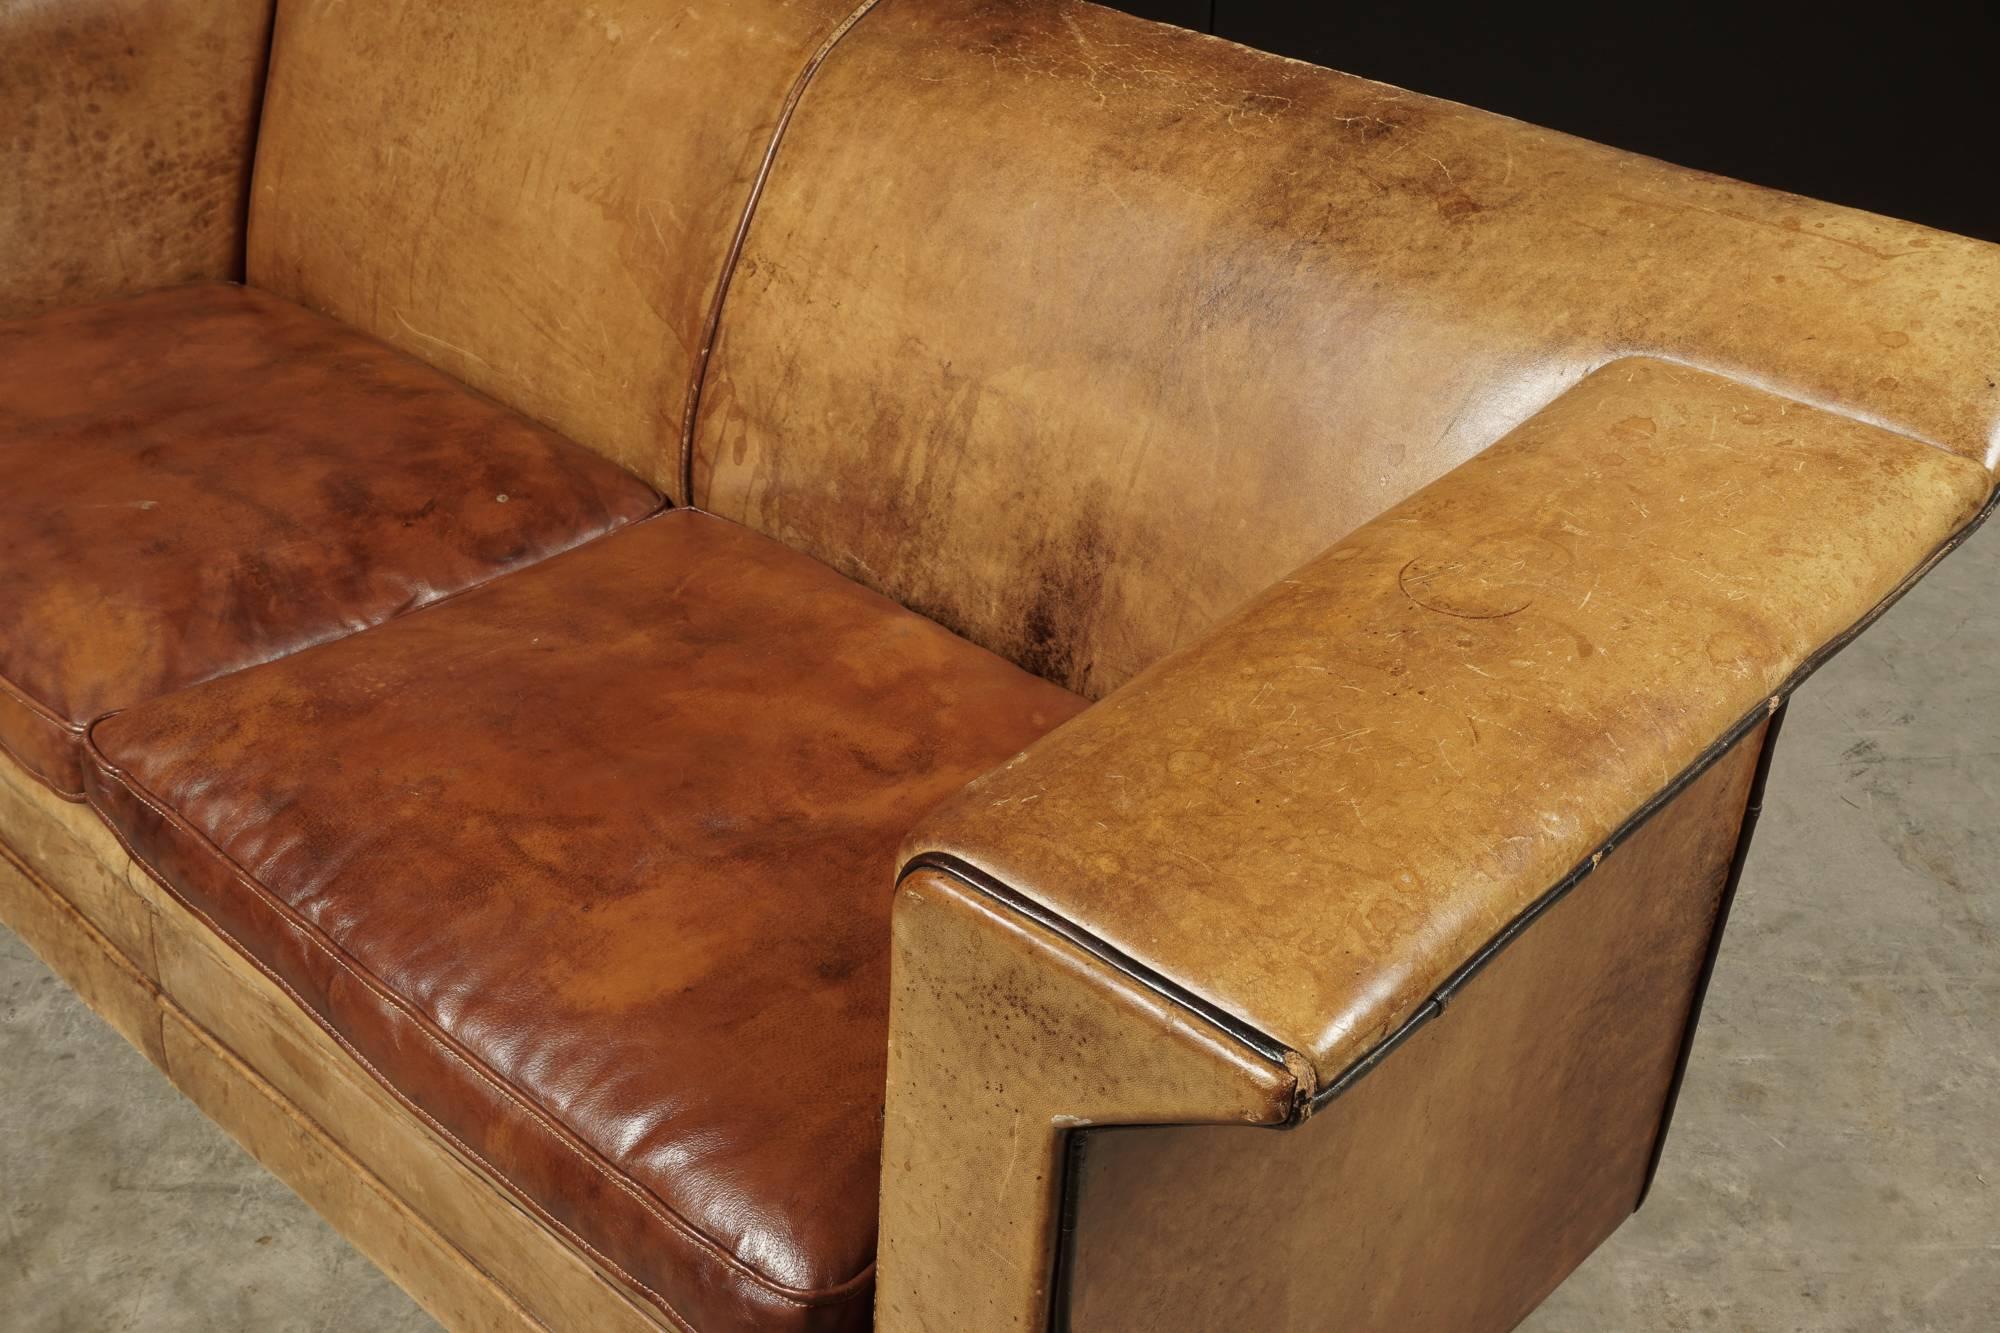 Rare Midcentury Leather Sofa With Profiled Arms and Feet 4